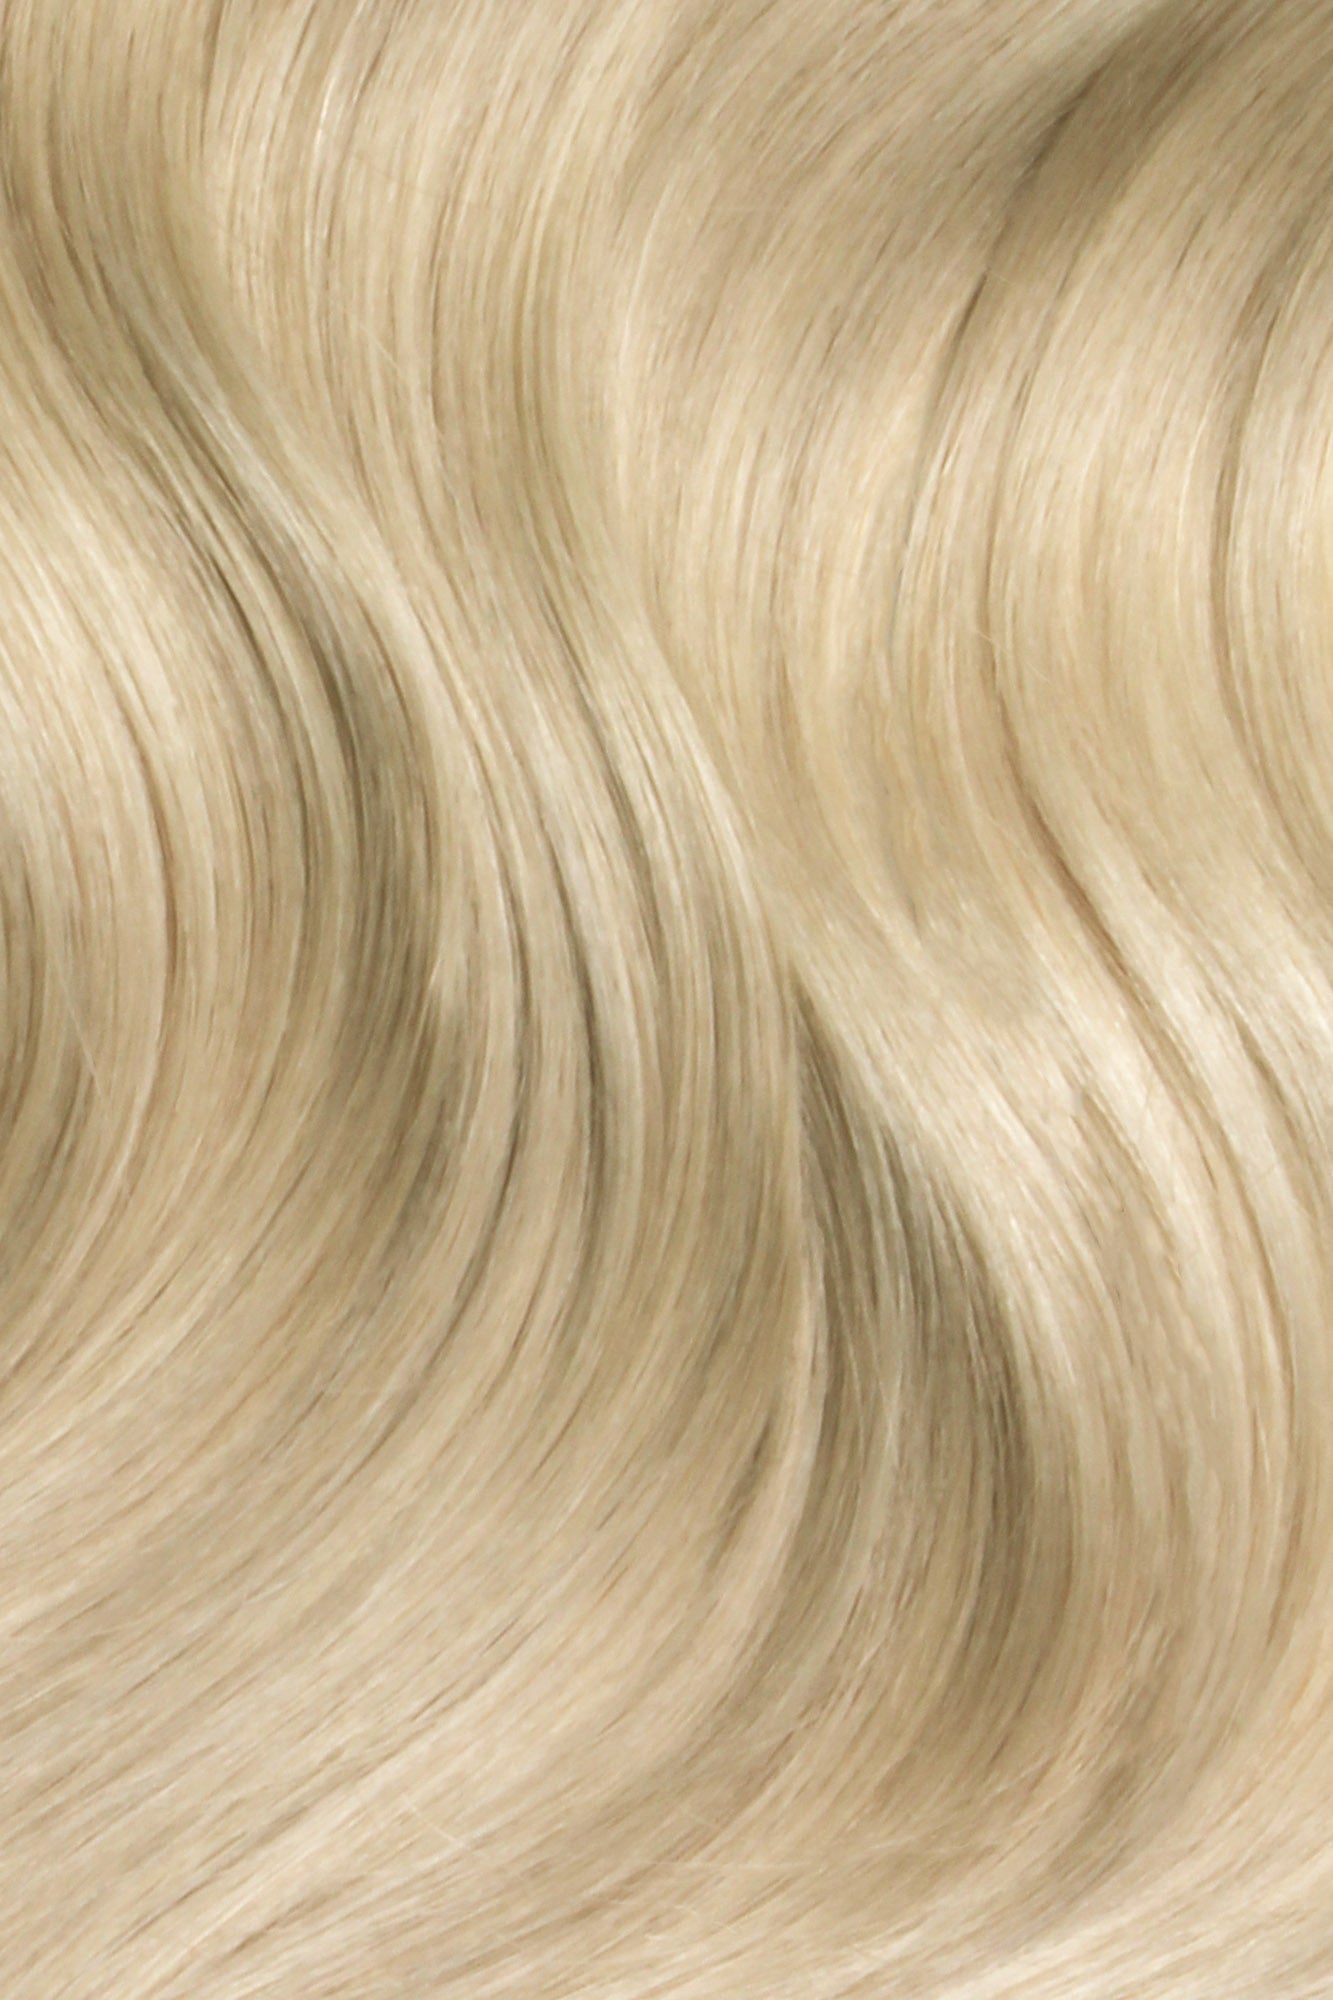 SEAMLESS® Tapes 24 Inches - SWAY Hair Extensions Hollywood-Ash-Blonde-18A-613A SWAY SEAMLESS® Tapes 24 Inches - Natural, lightweight hair extensions for longer, fuller, and luxurious hair. Virtually undetectable, reusable, and perfect for any hairstyle